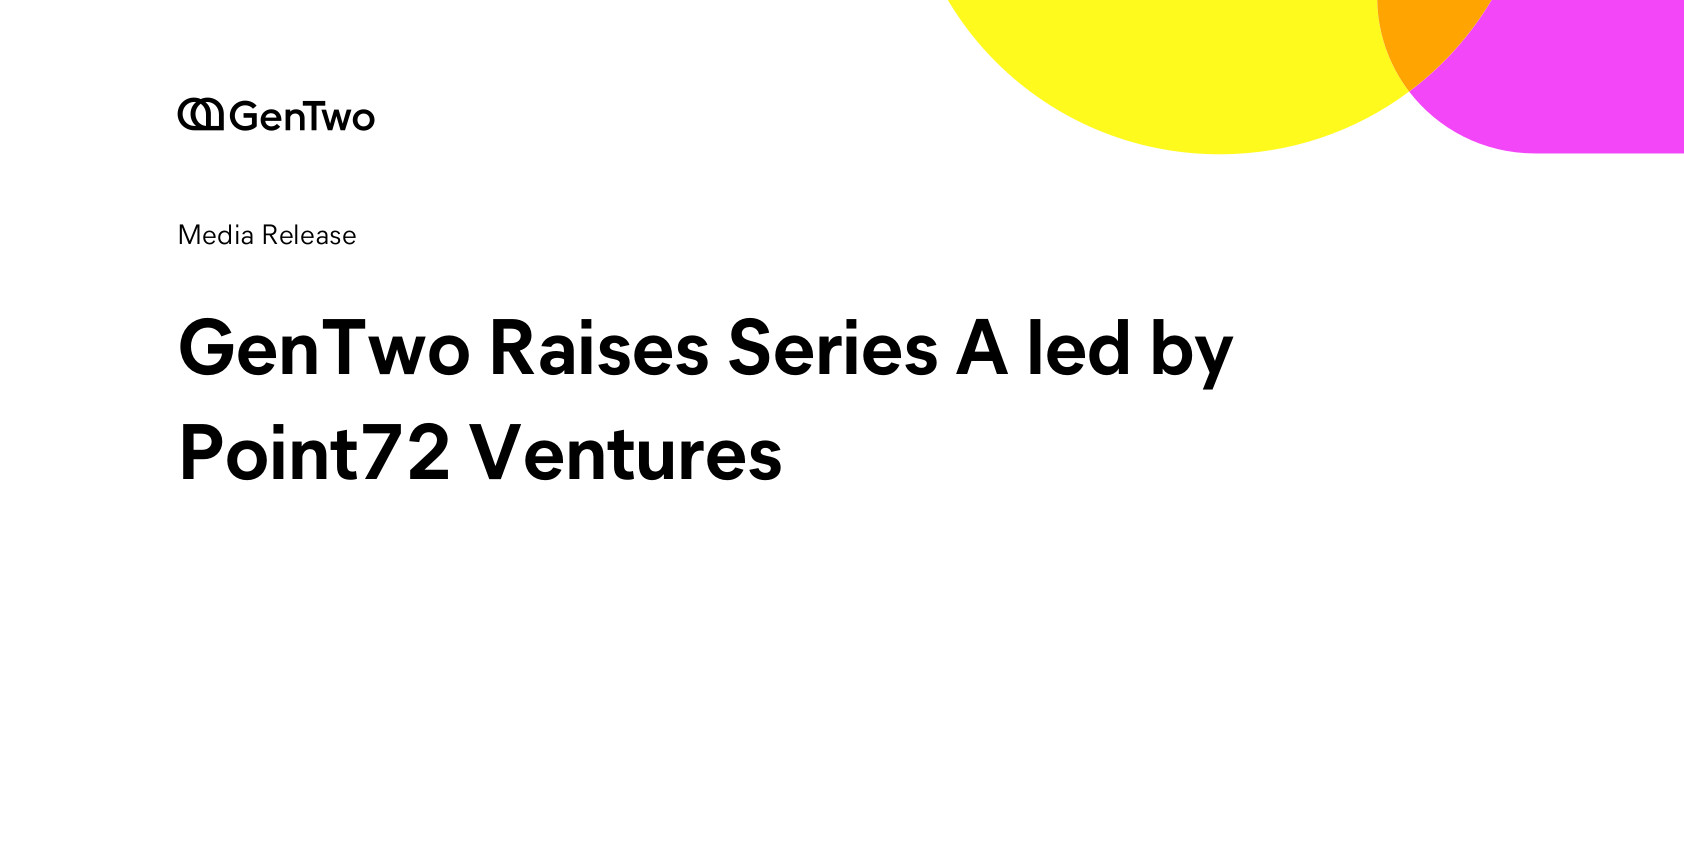 GenTwo Raises Series A led by Point72 Ventures